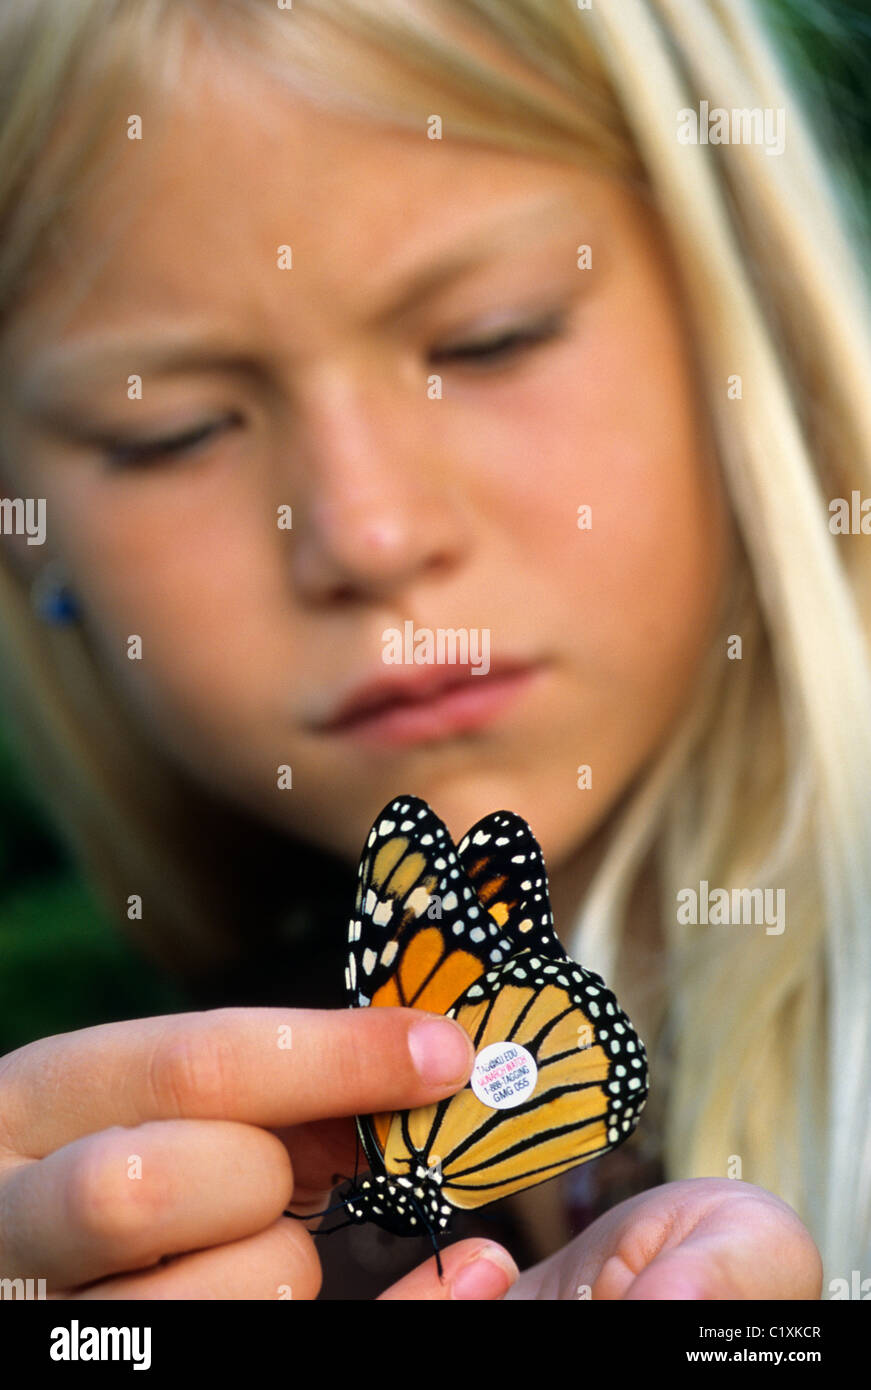 YOUNG GIRL BANDS A MONARCH BUTTERFLY AS PART OF SCHOOL PROJECT IN MINNESOTA.  SUMMER. Stock Photo